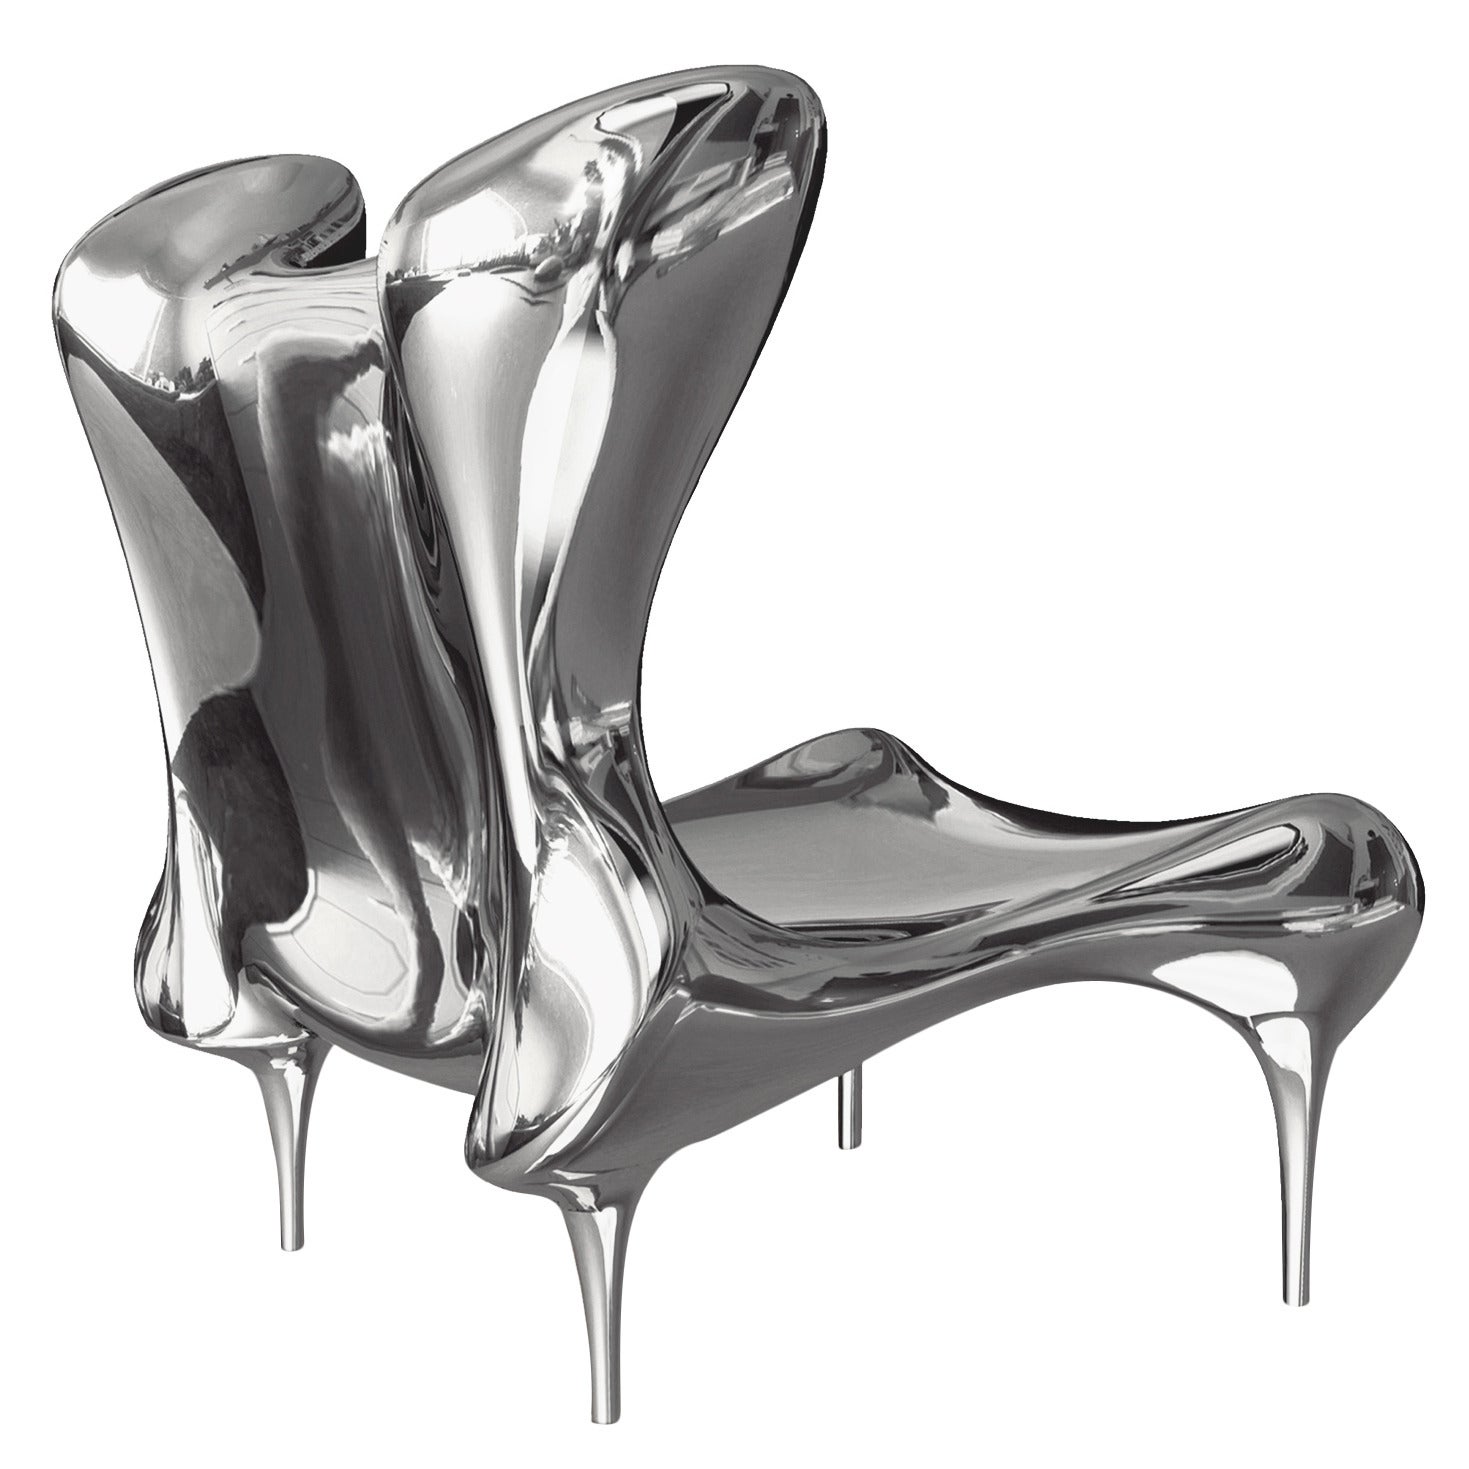 Riemann Chair in Mirror Polished Stainless Steel For Sale